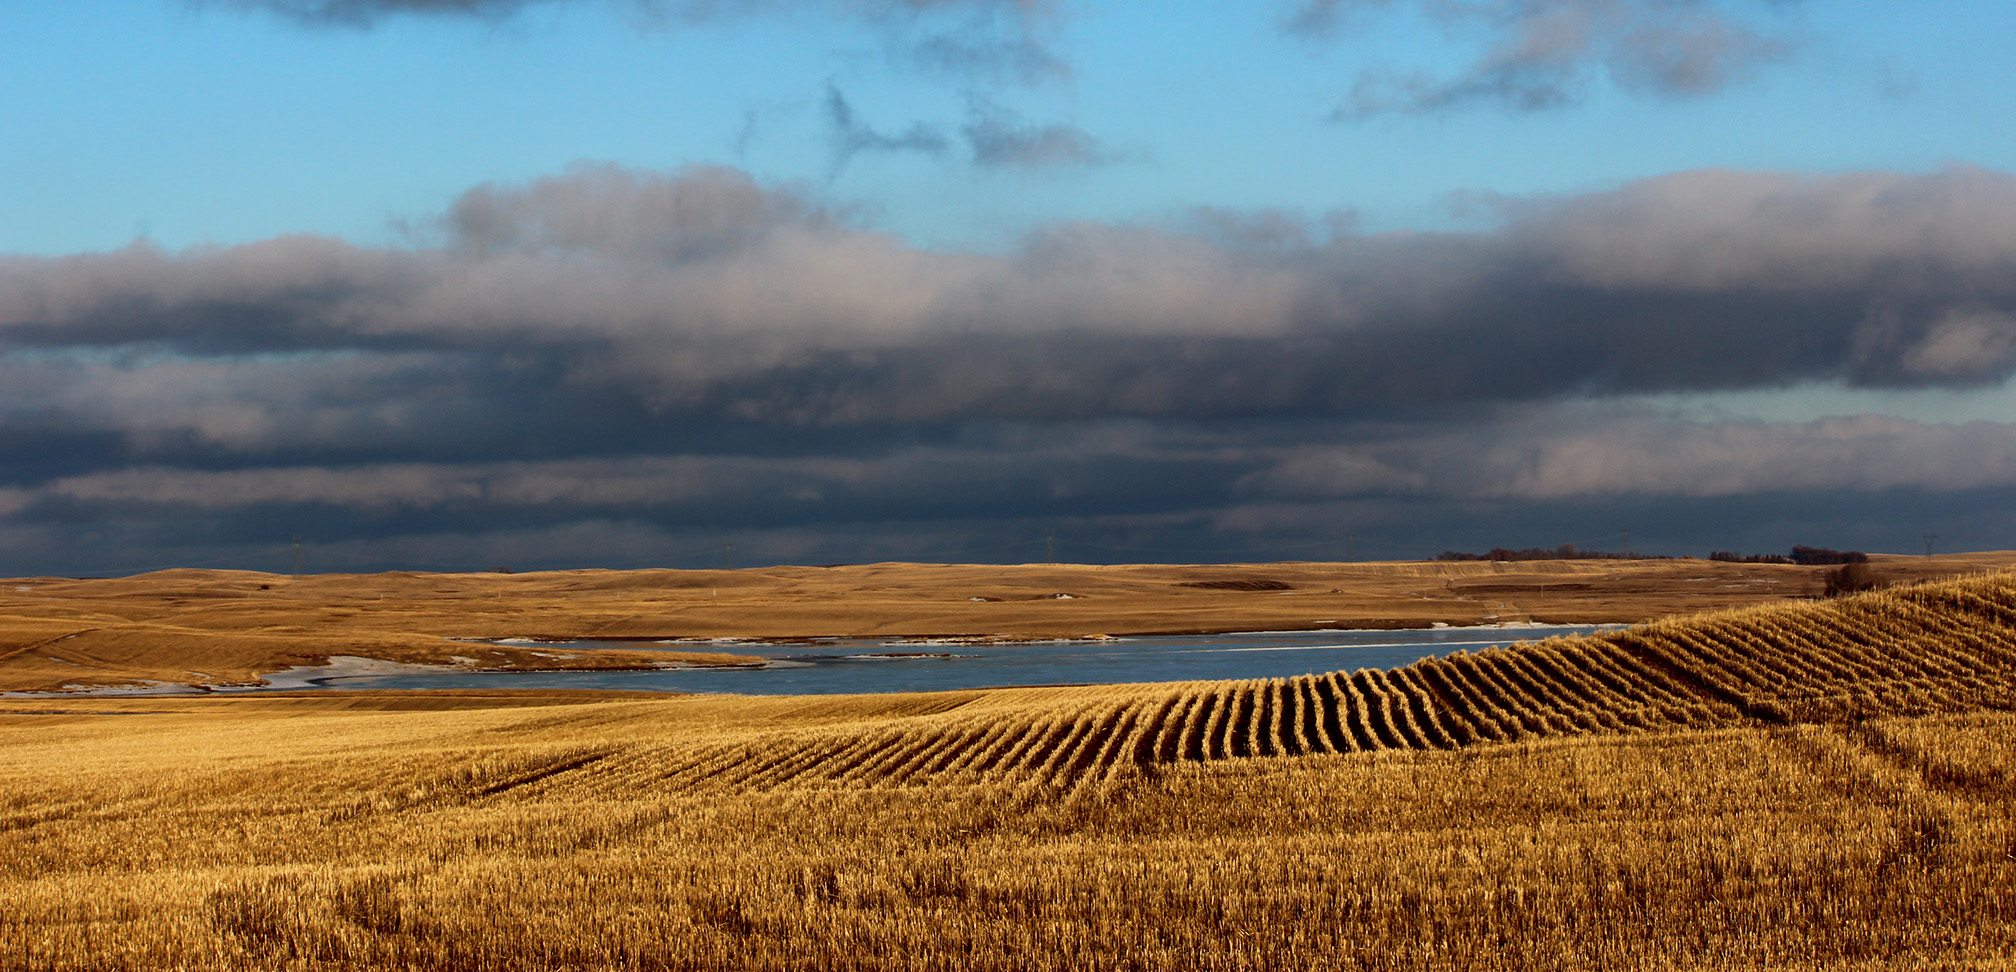 "A farm landscape showing brown stubble of corn in fields surrounding a wetland pond. The water appears dark blue, reflecting the gray clouds in the blue sky."